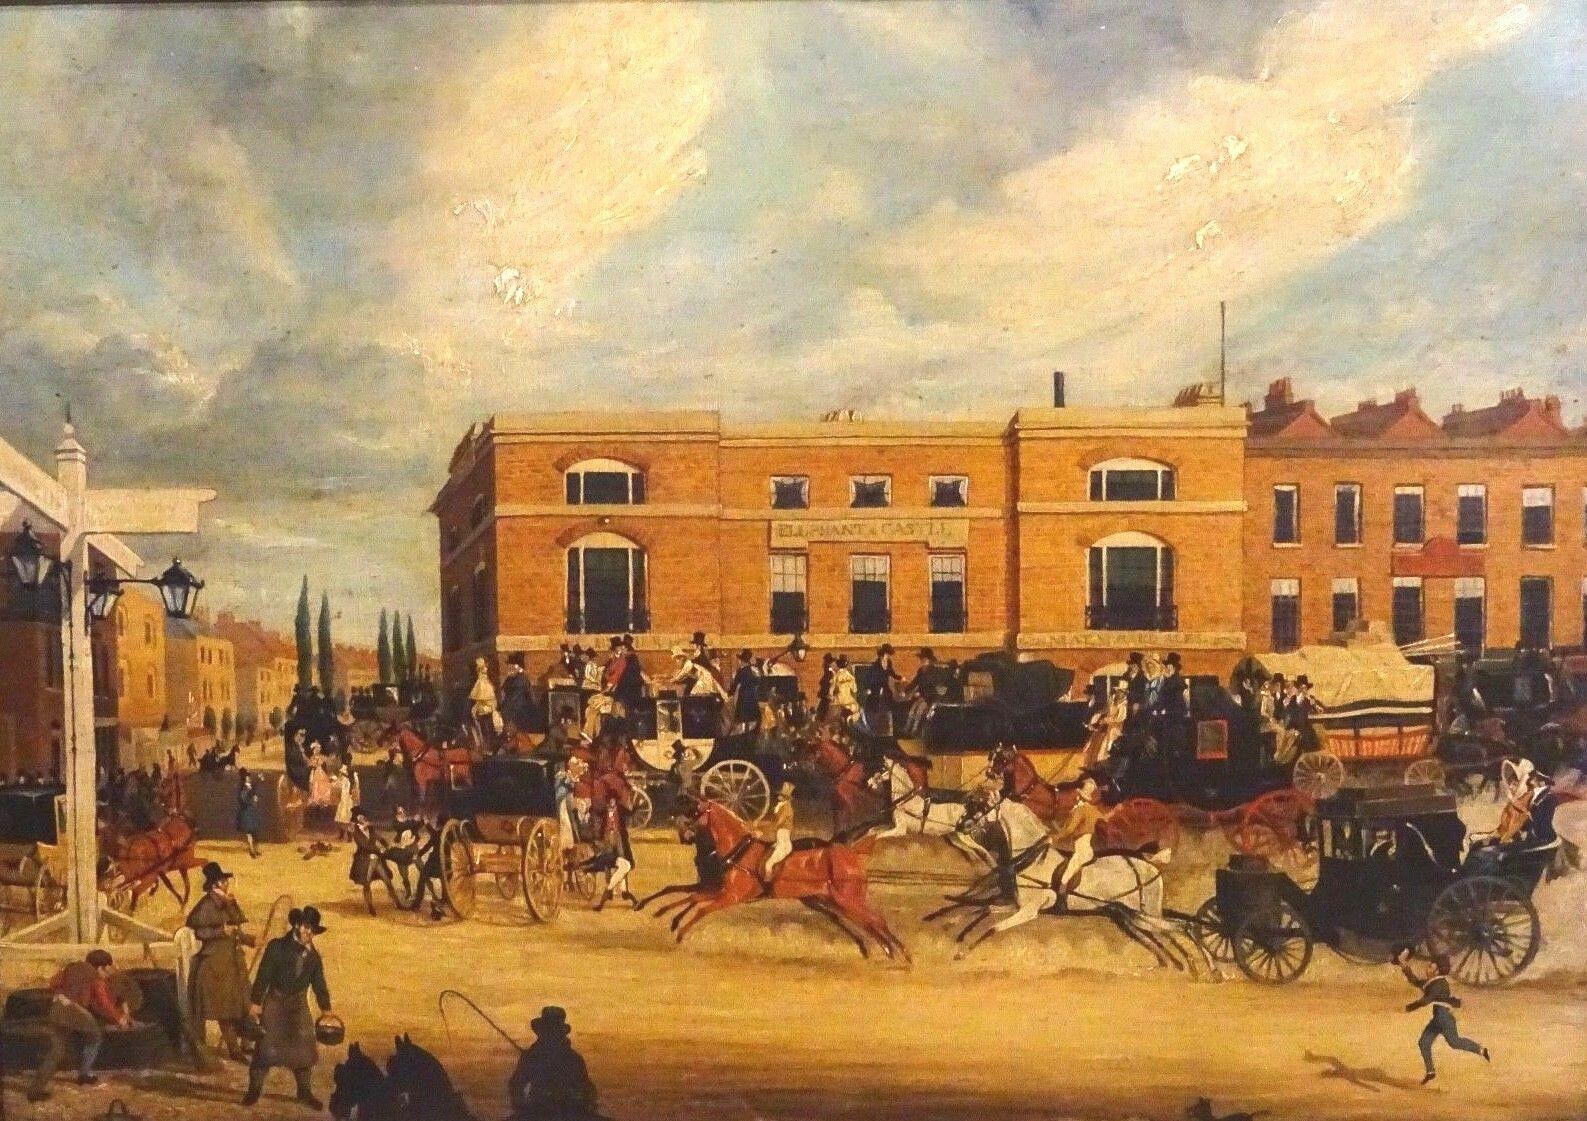 Street Scene At Elephant And Castle, London, 19th Century - Painting by James Pollard